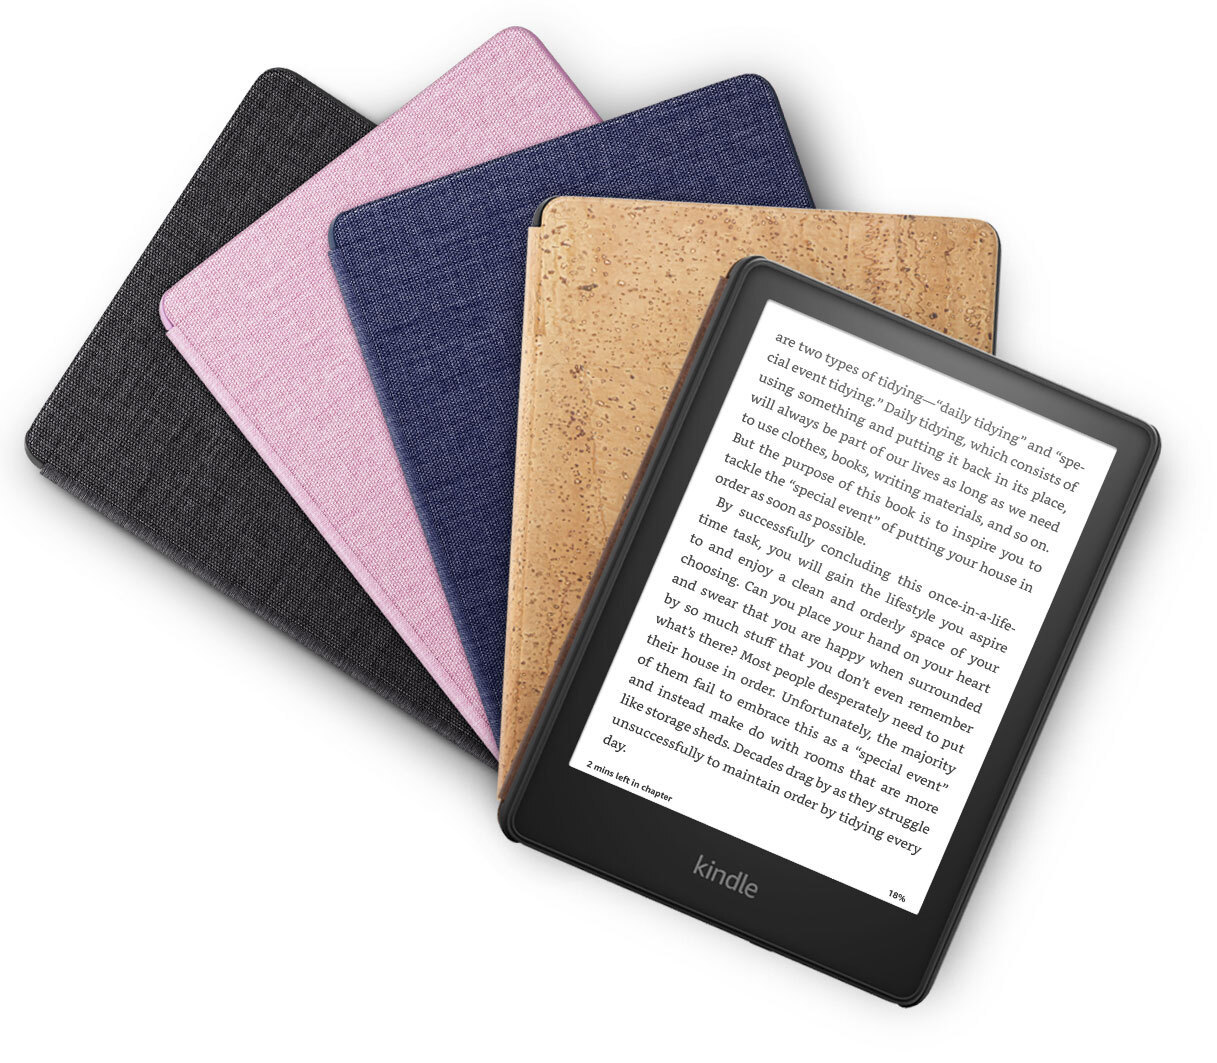 Amazon Unveils the Next Generation Kindle Paperwhite and New 